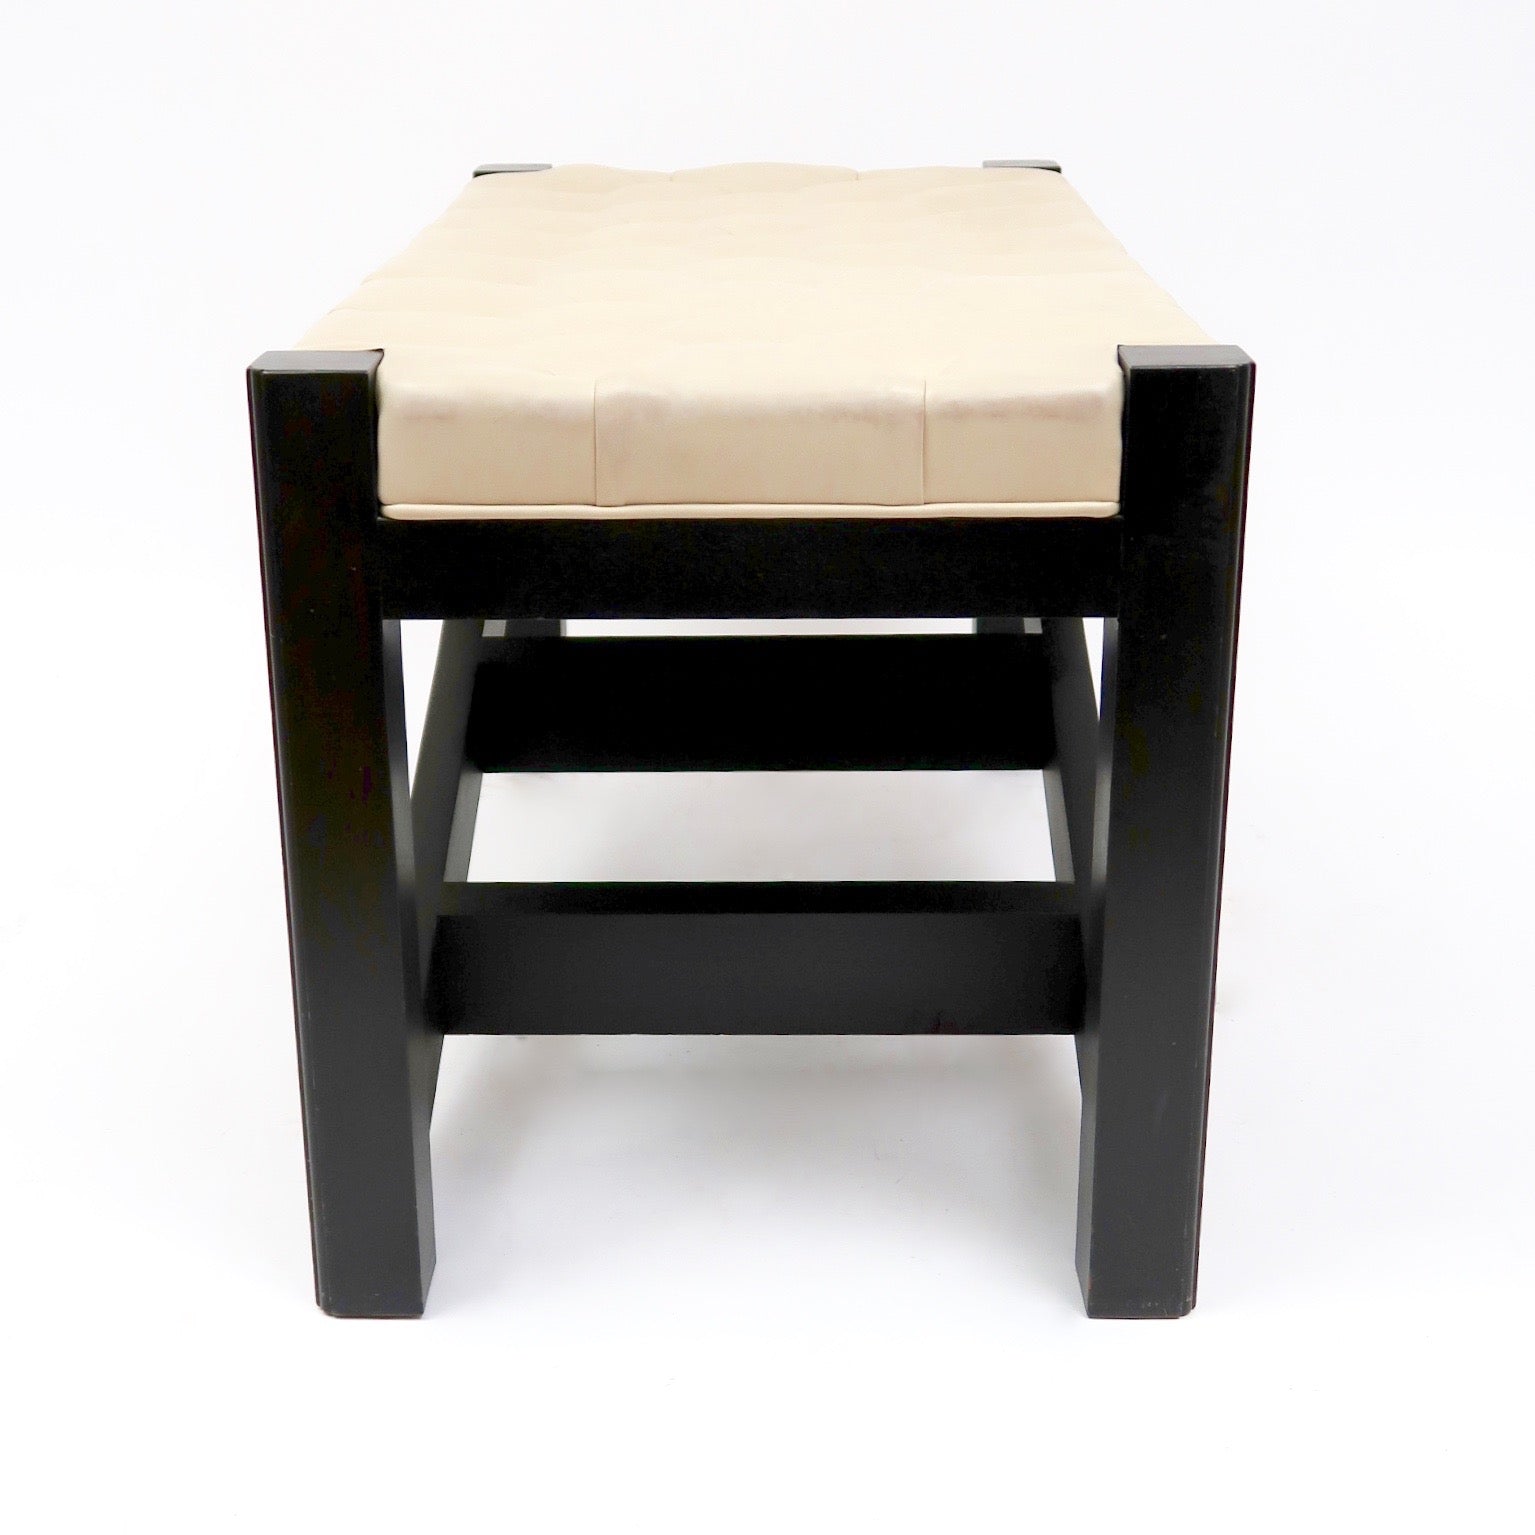 Leather topped stool which doubles as library steps.